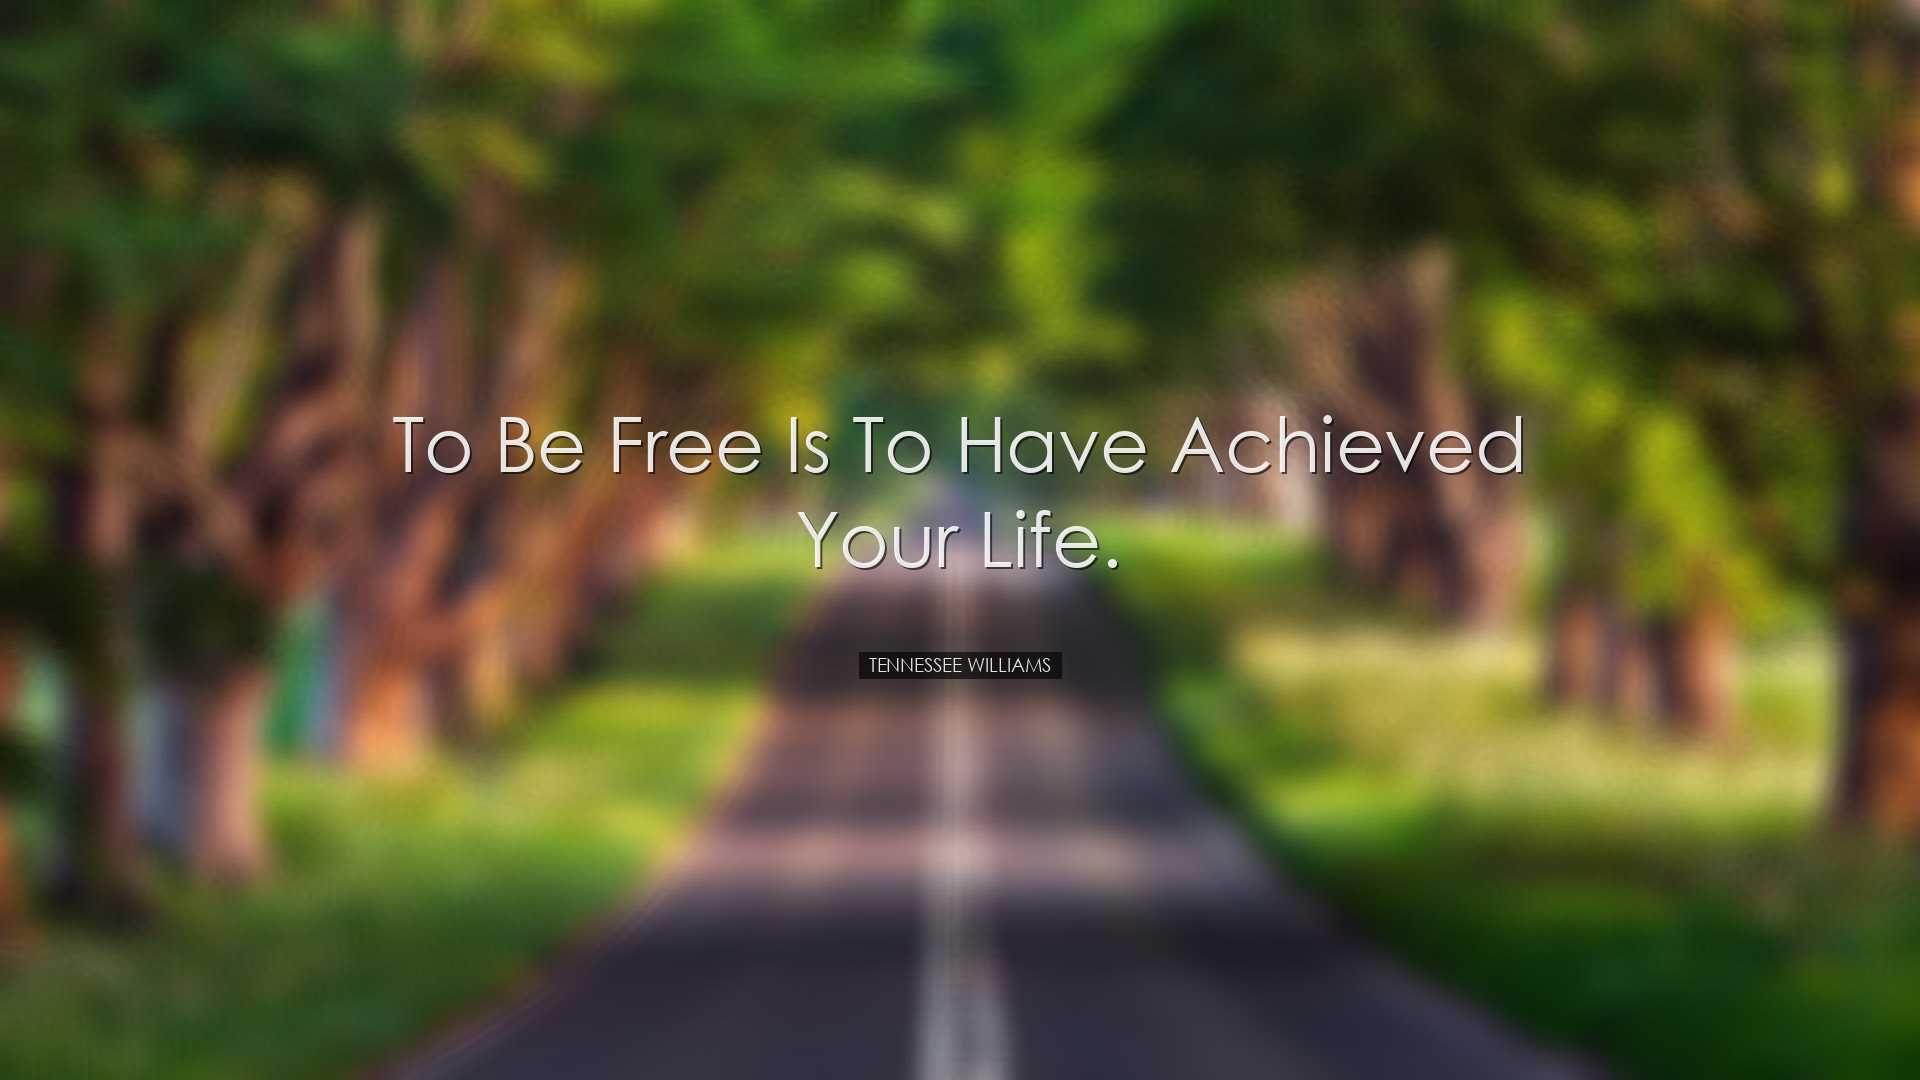 To be free is to have achieved your life. - Tennessee Williams